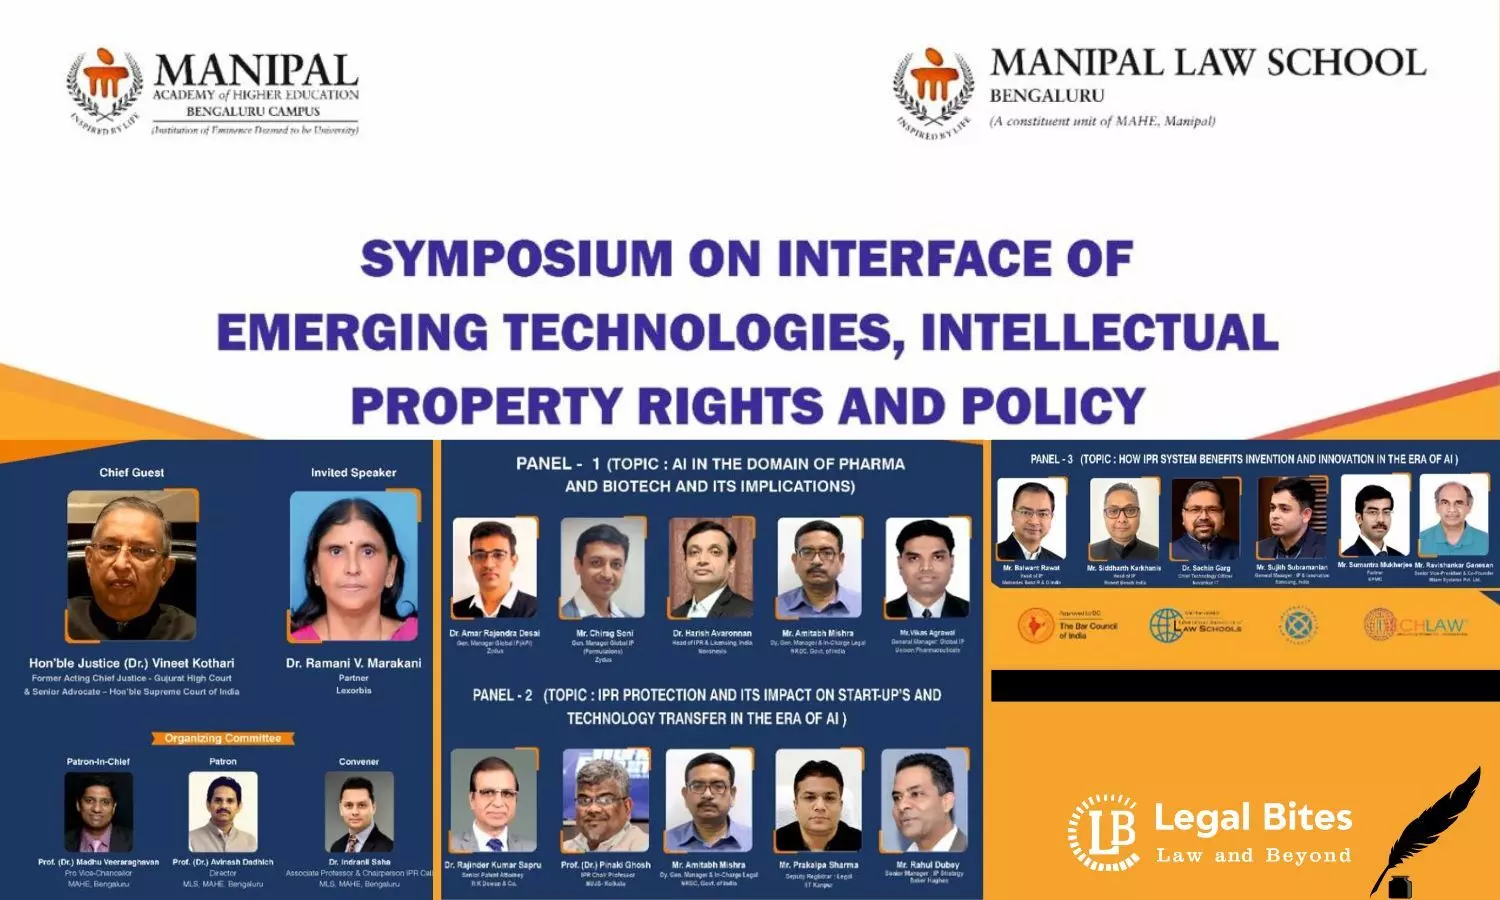 Symposium on Interface of Emerging Technologies, Intellectual Property Rights and Policy | Manipal Law School (MAHE) Bengaluru